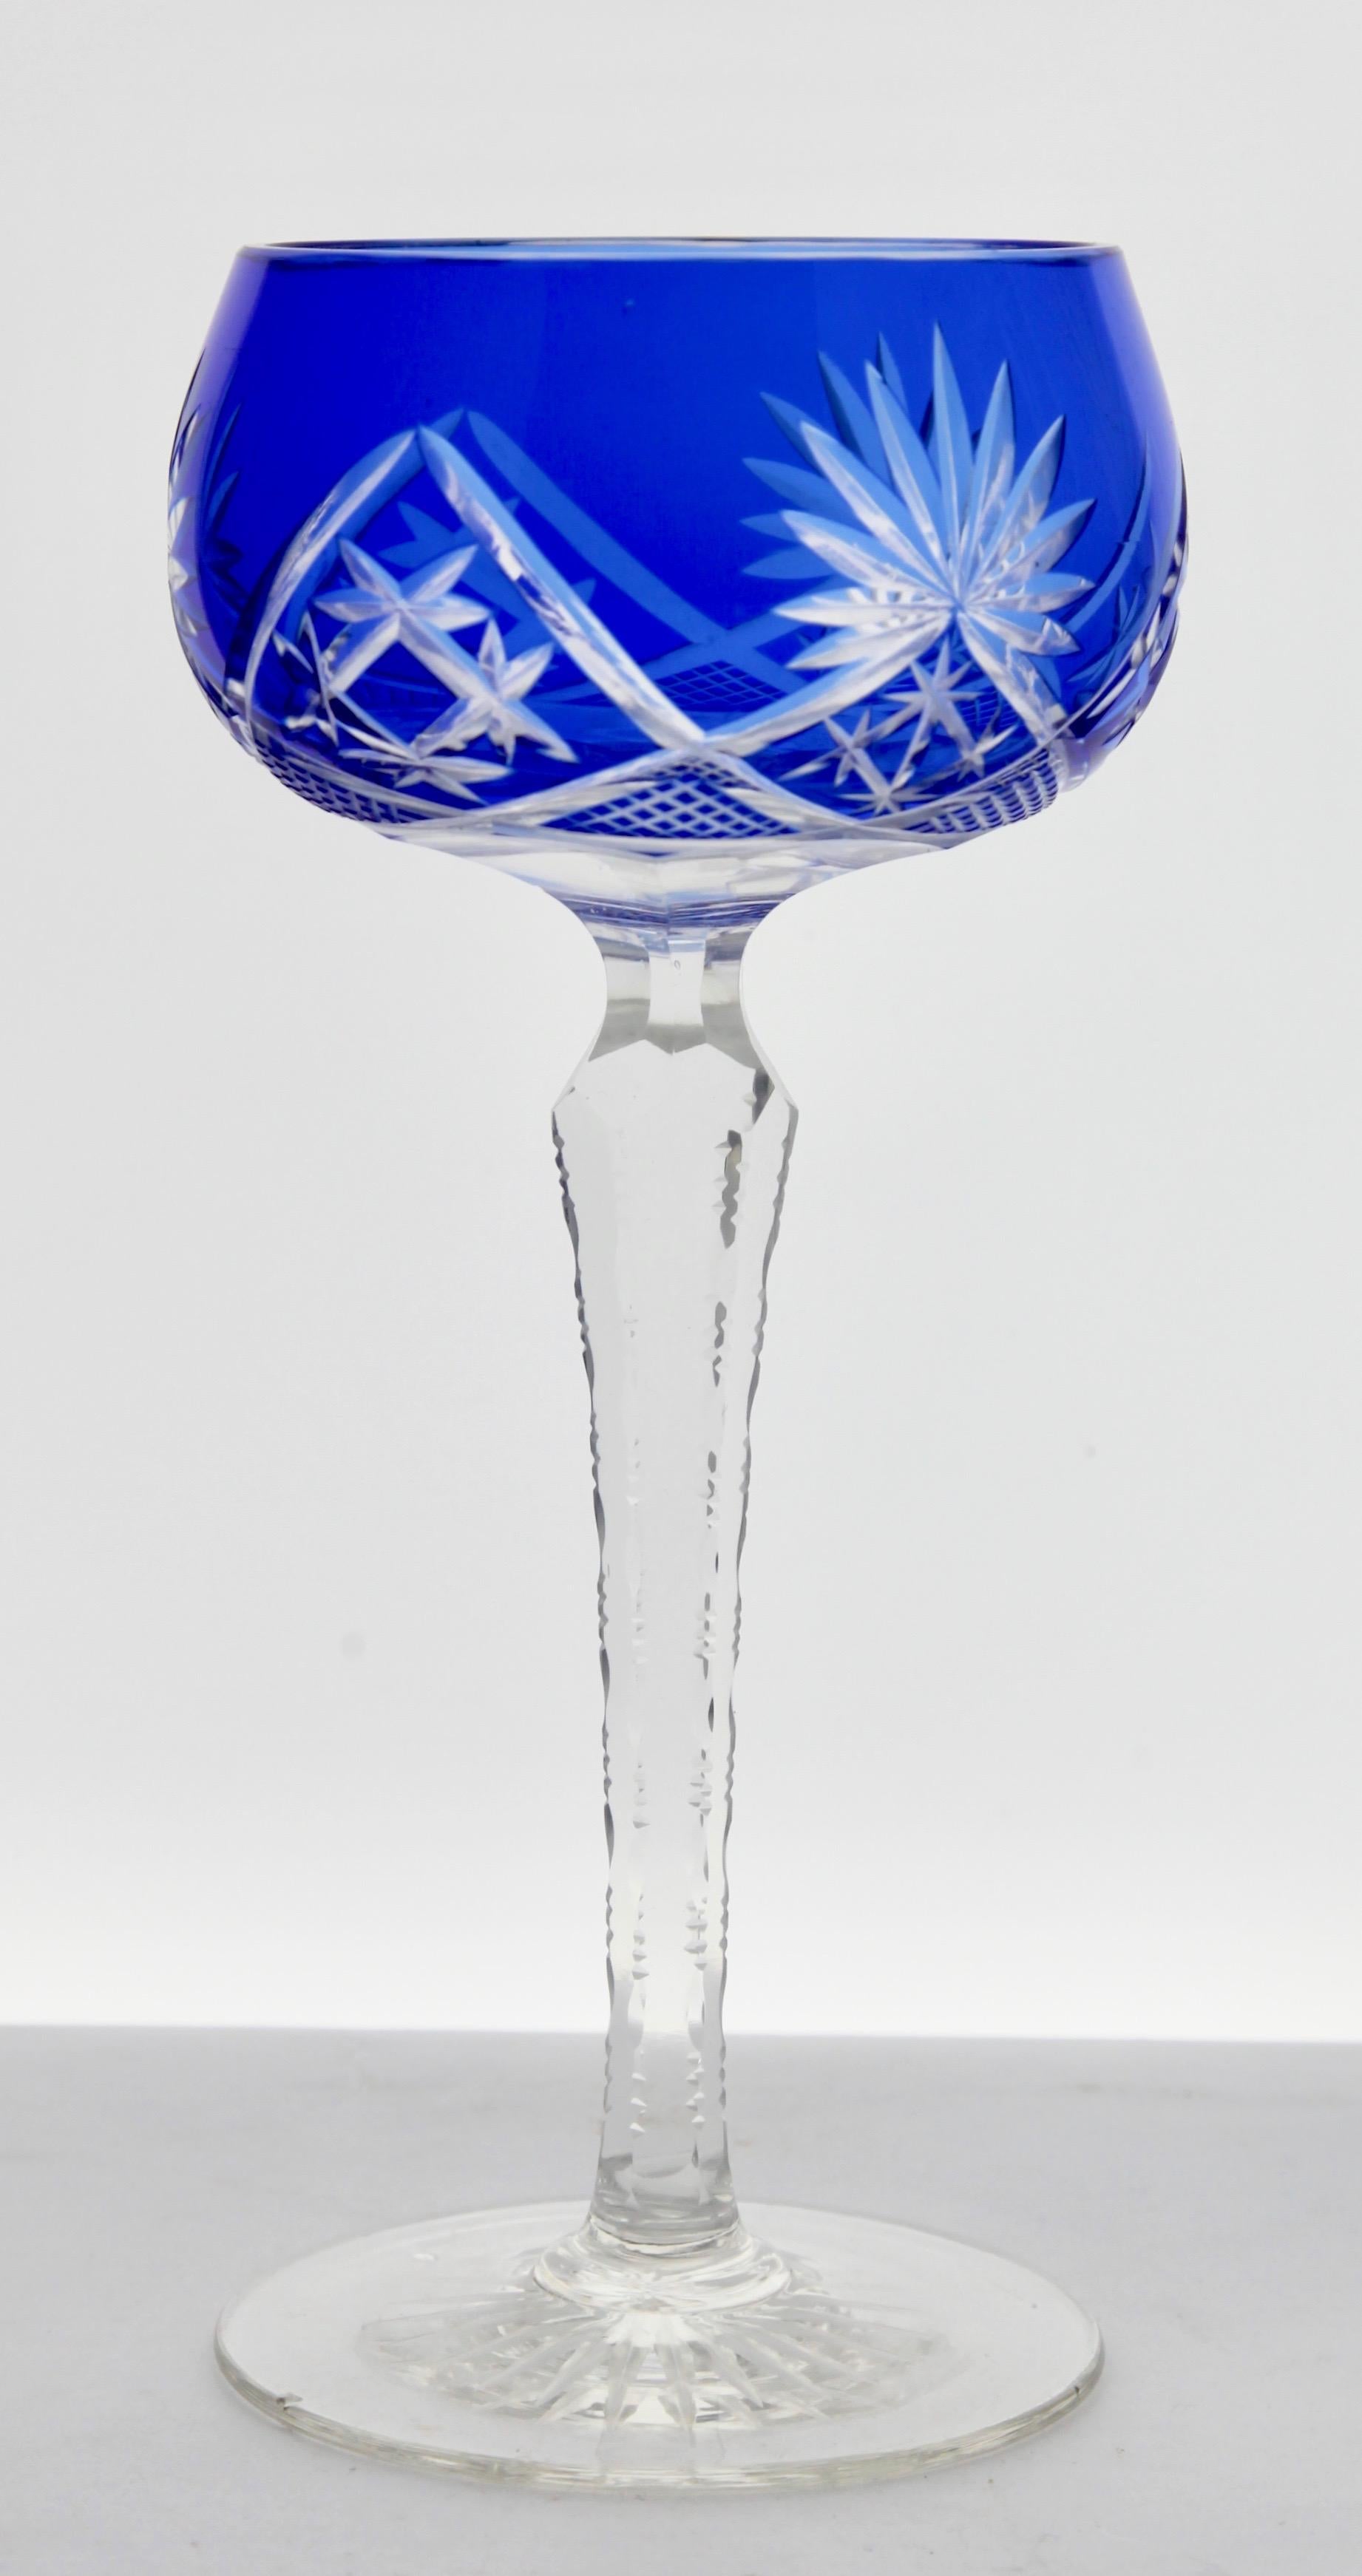 Mid-20th Century Set of 6 Mixed Stem Glasses Cobalt Blue with Colored Overlay Cut to Clear